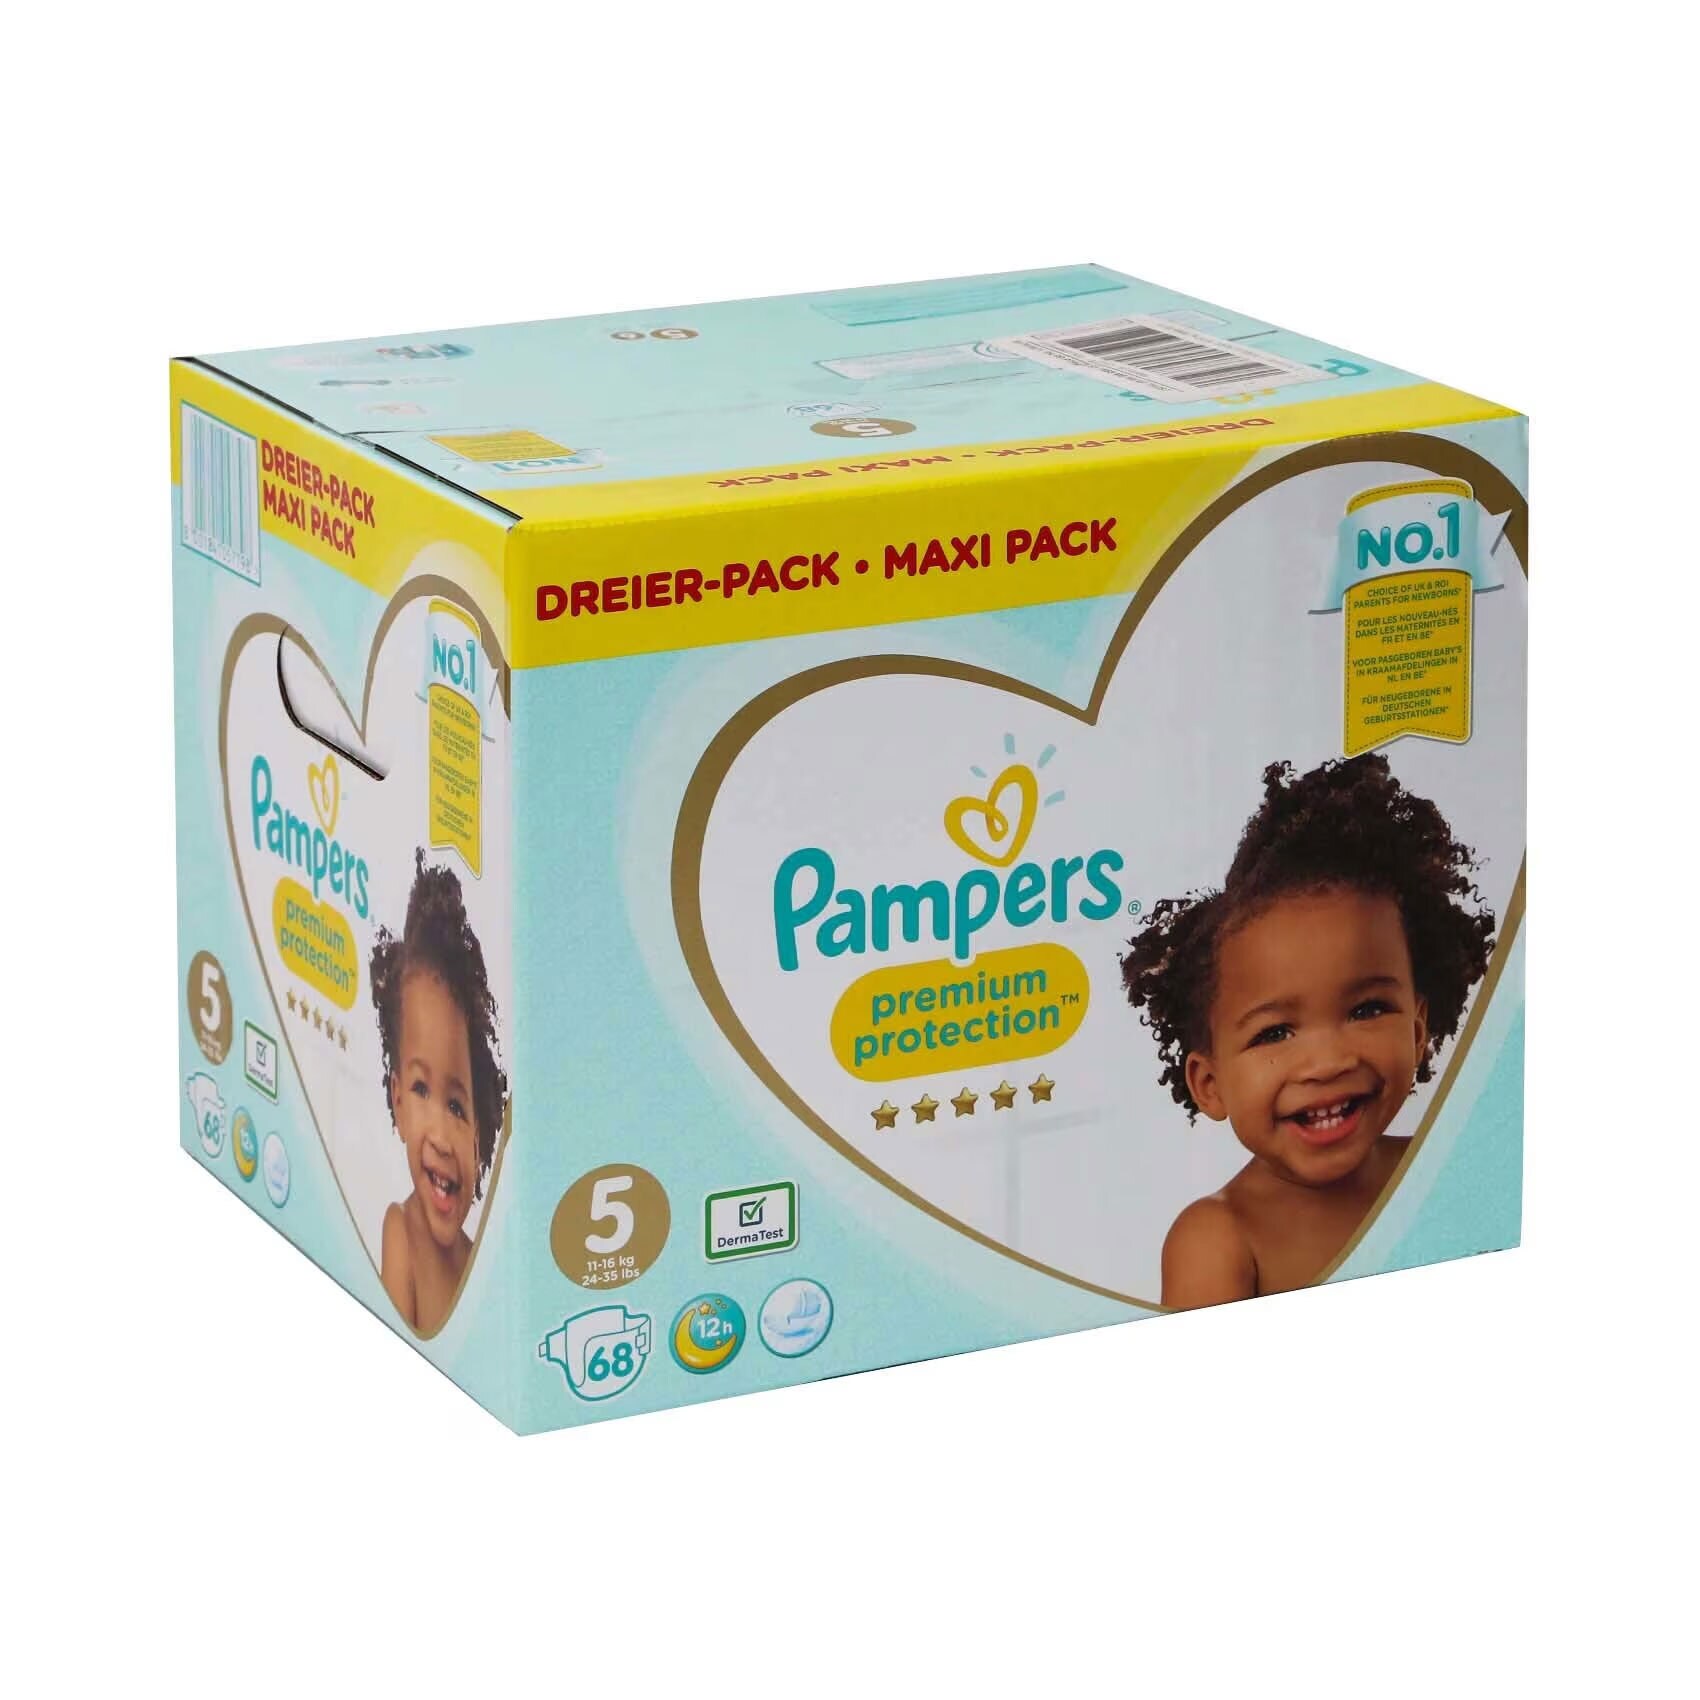 Pampers Baby Dry taille 5-11 à 16kg - 74 pièces